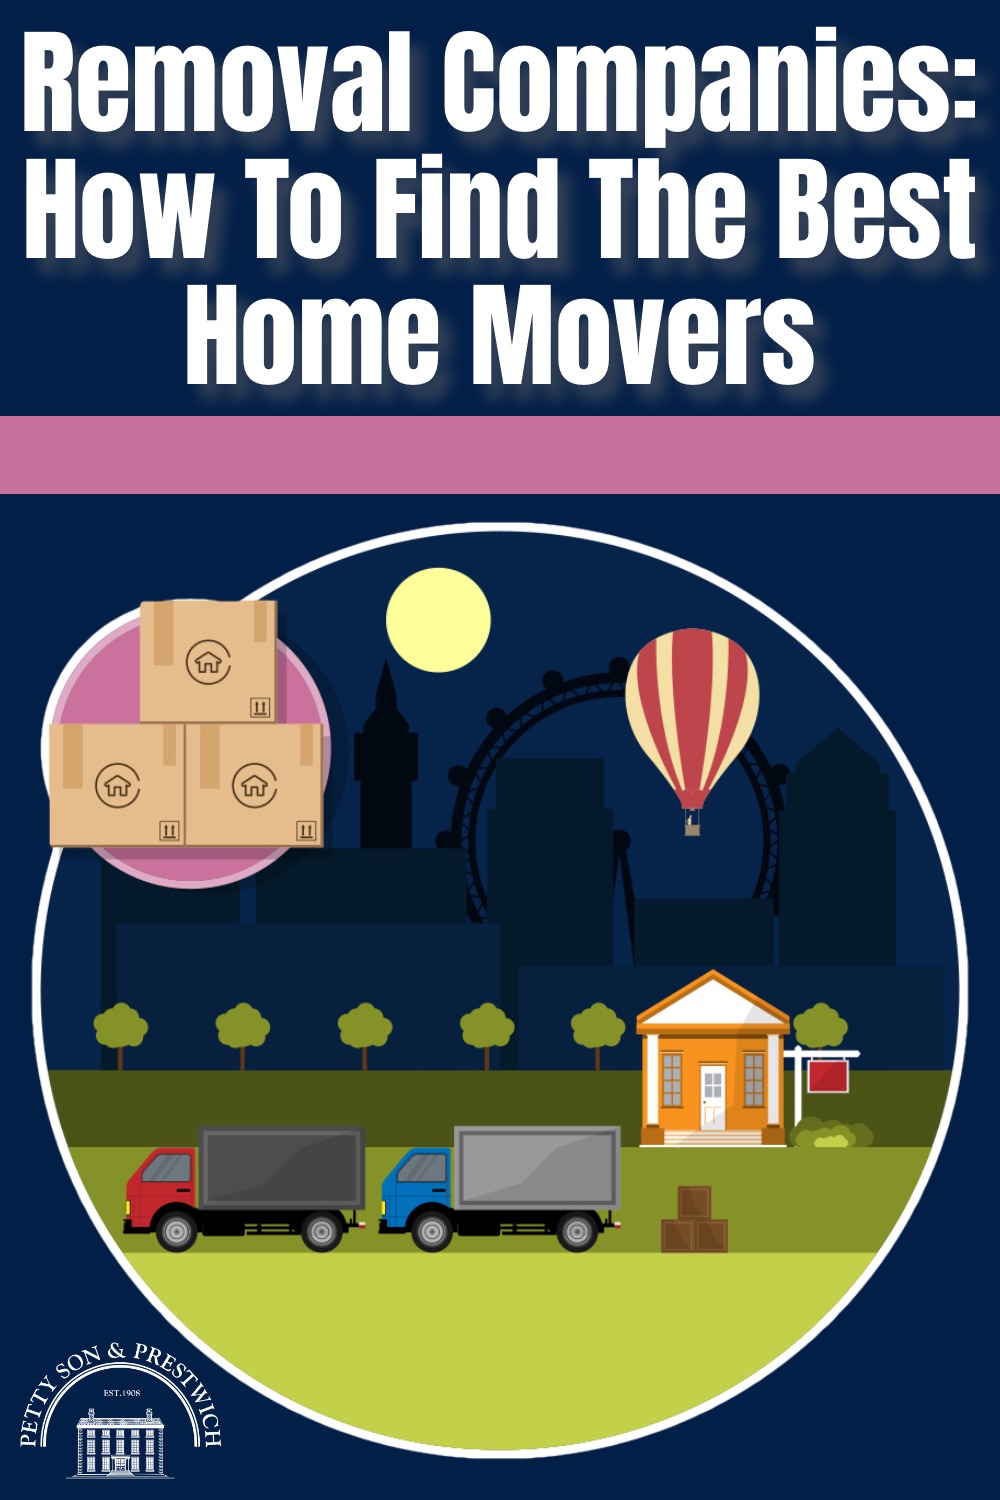 choosing the right removal company for you home move